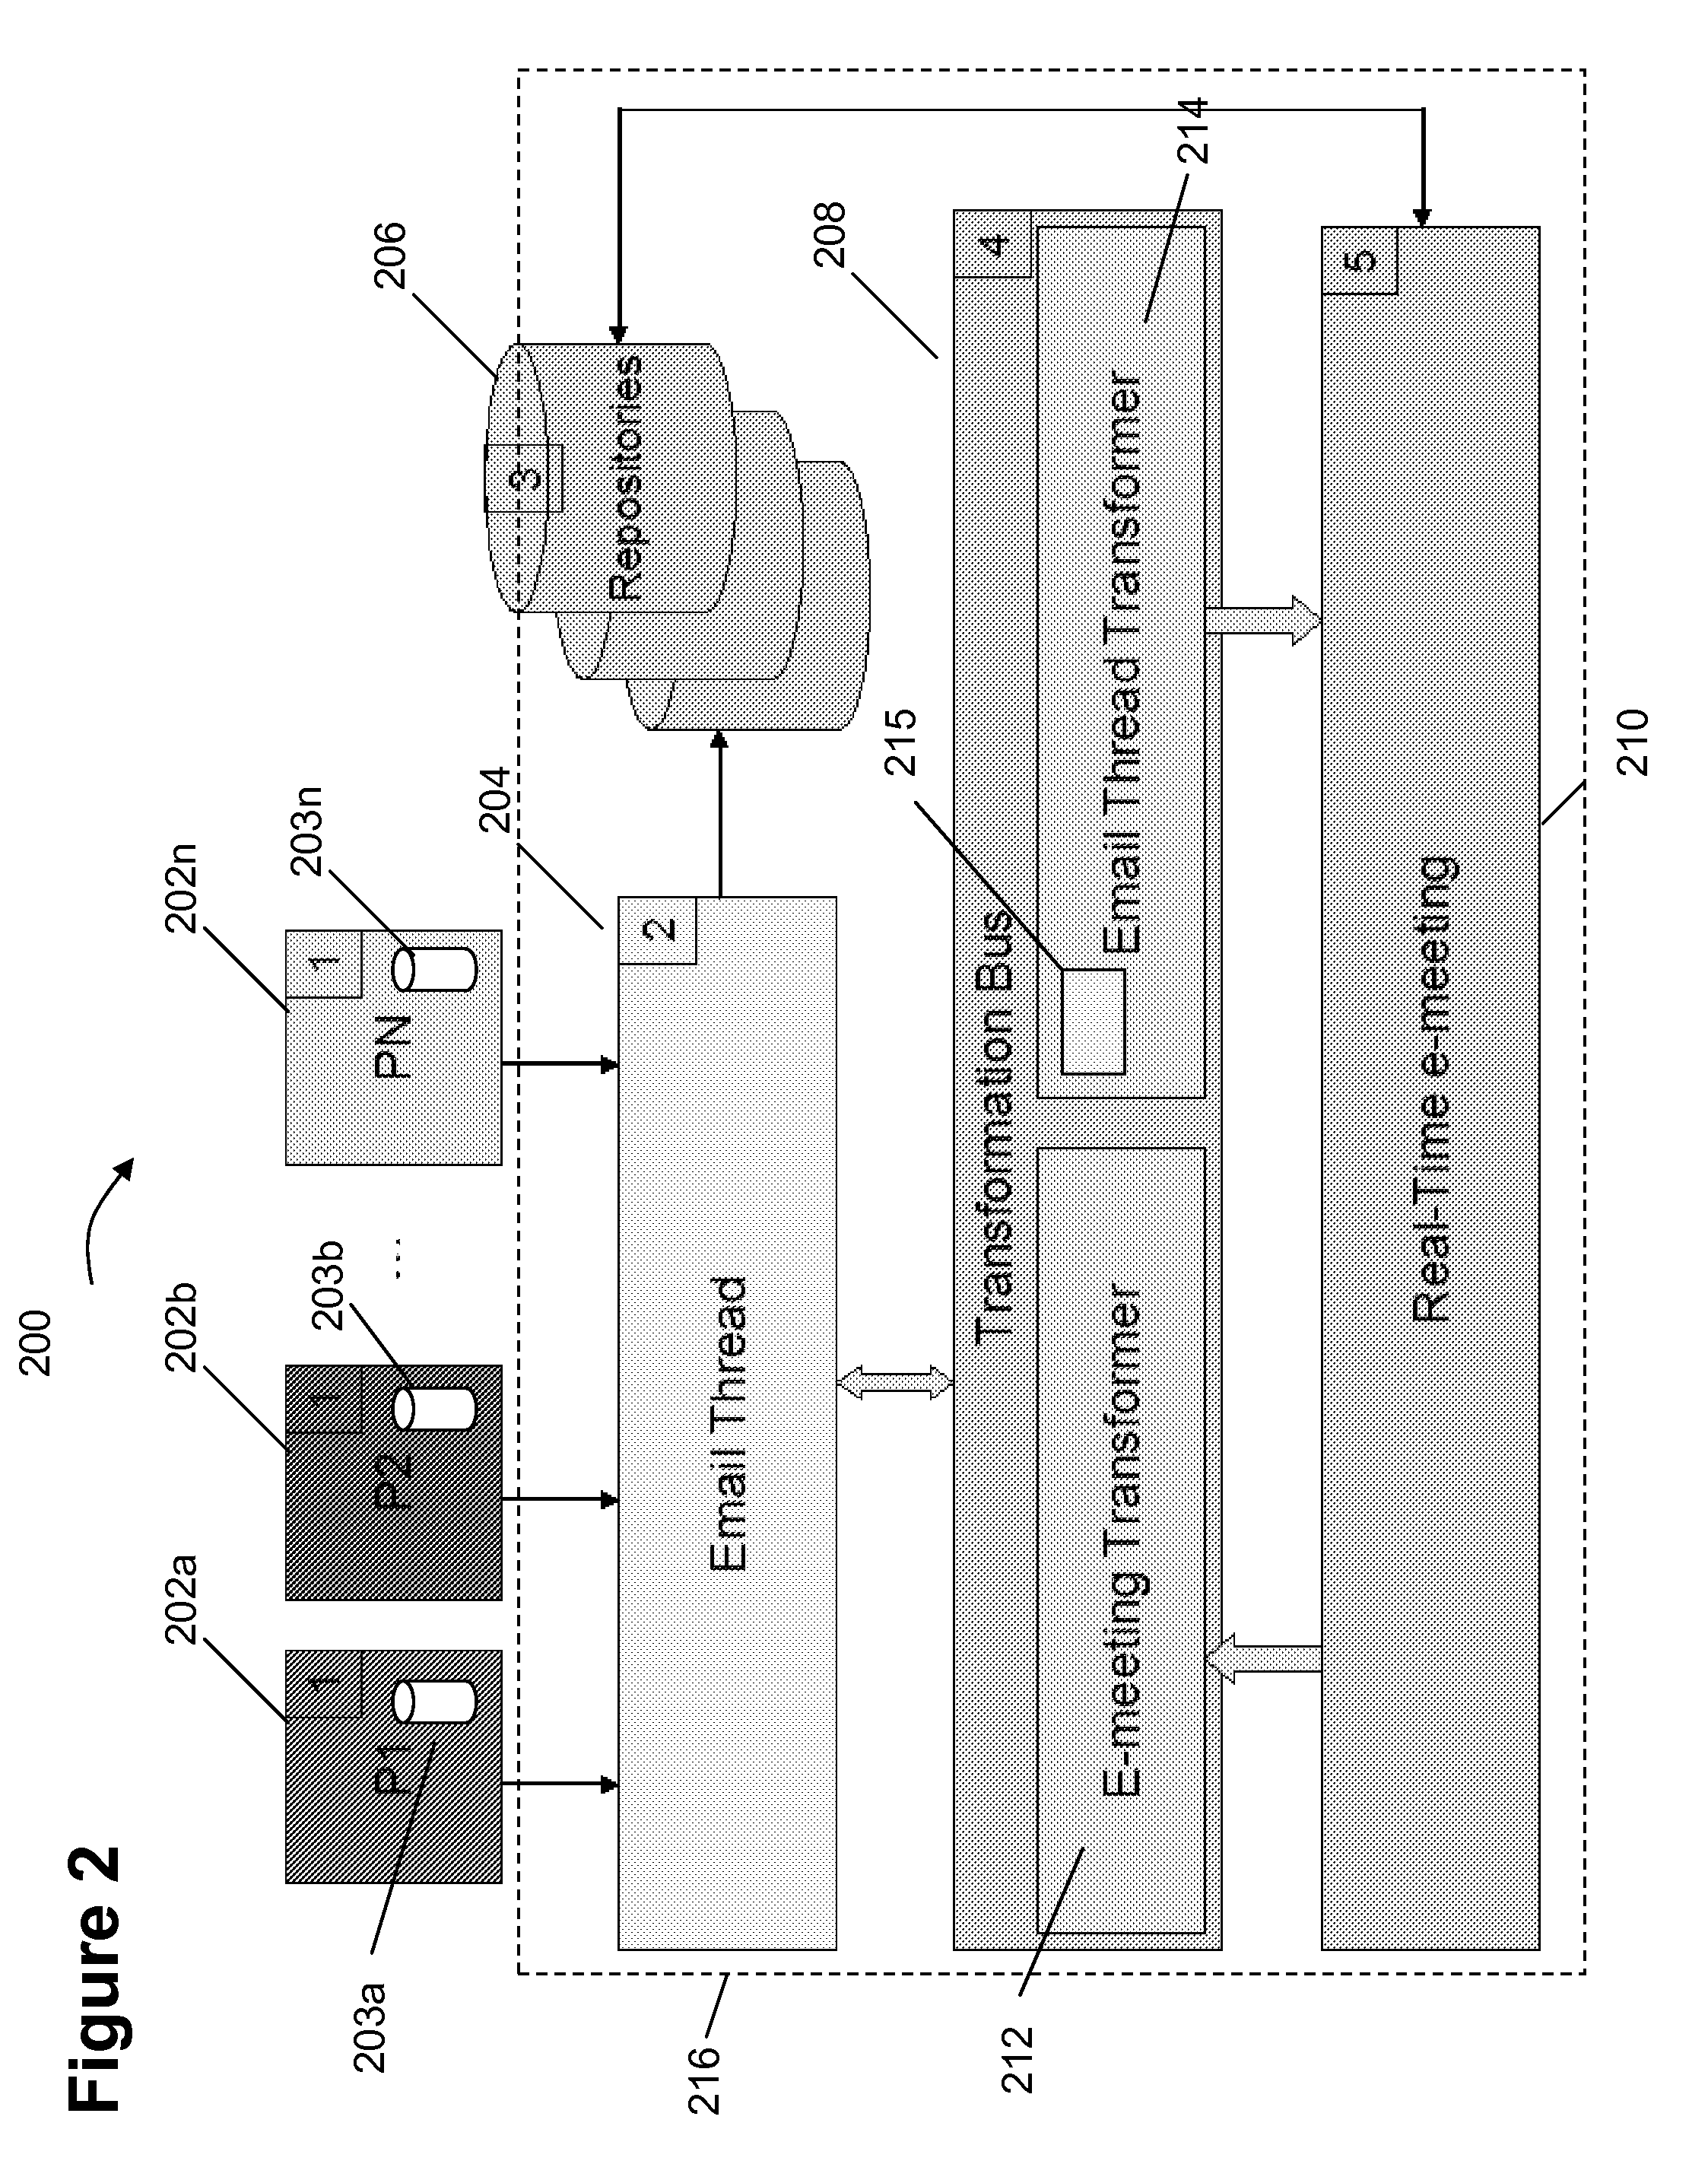 System and method for transforming a thread of email messages into a real-time meeting